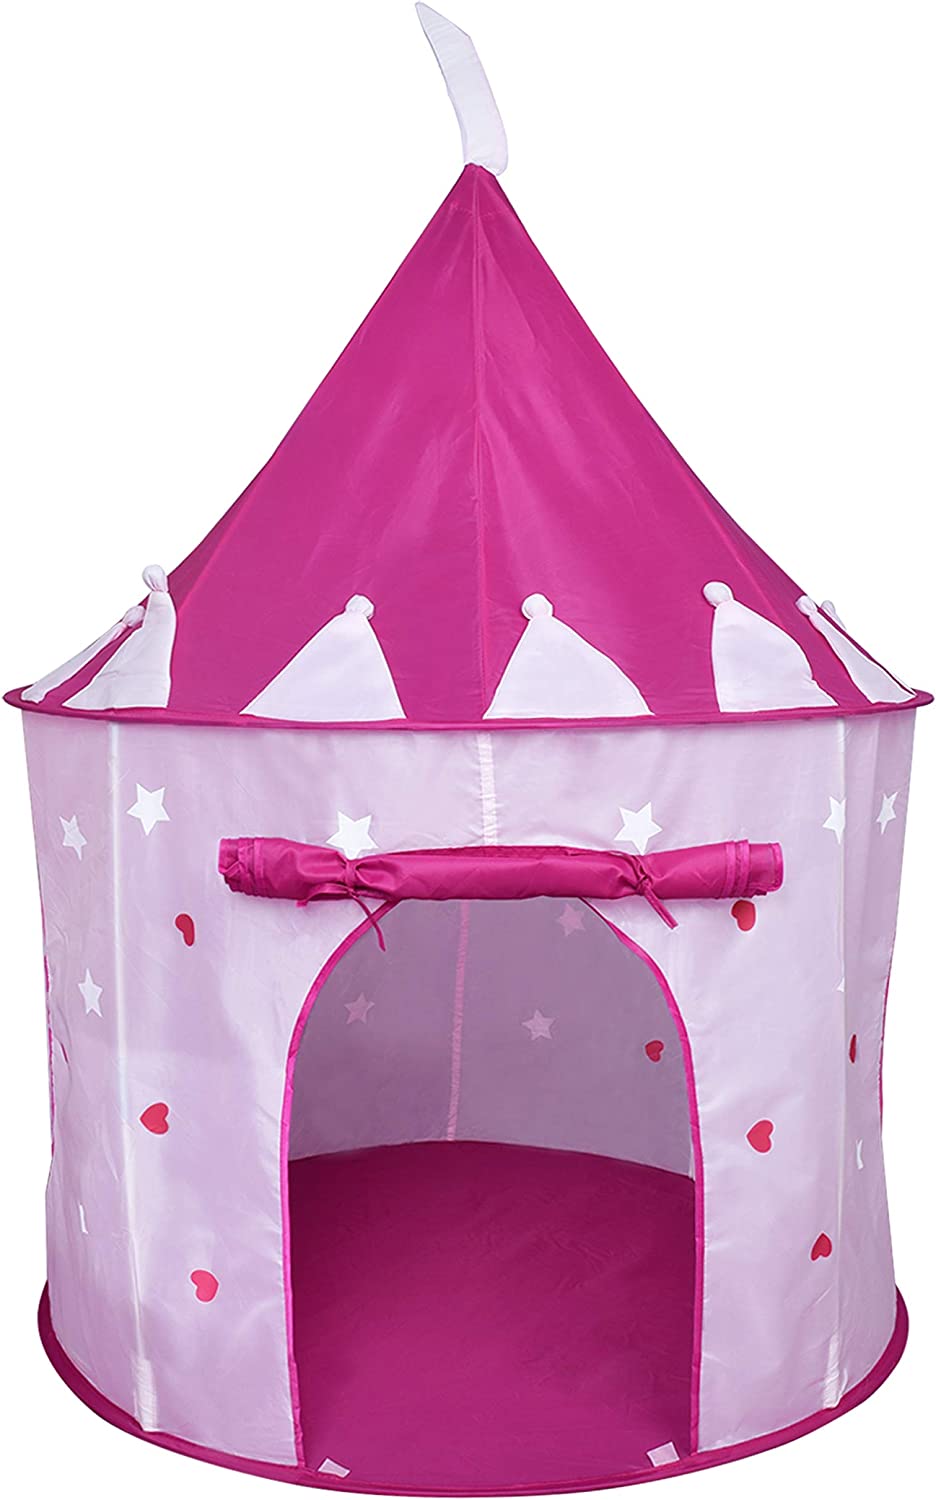  2. Princess Castle Tent with Glow in the Dark Stars 